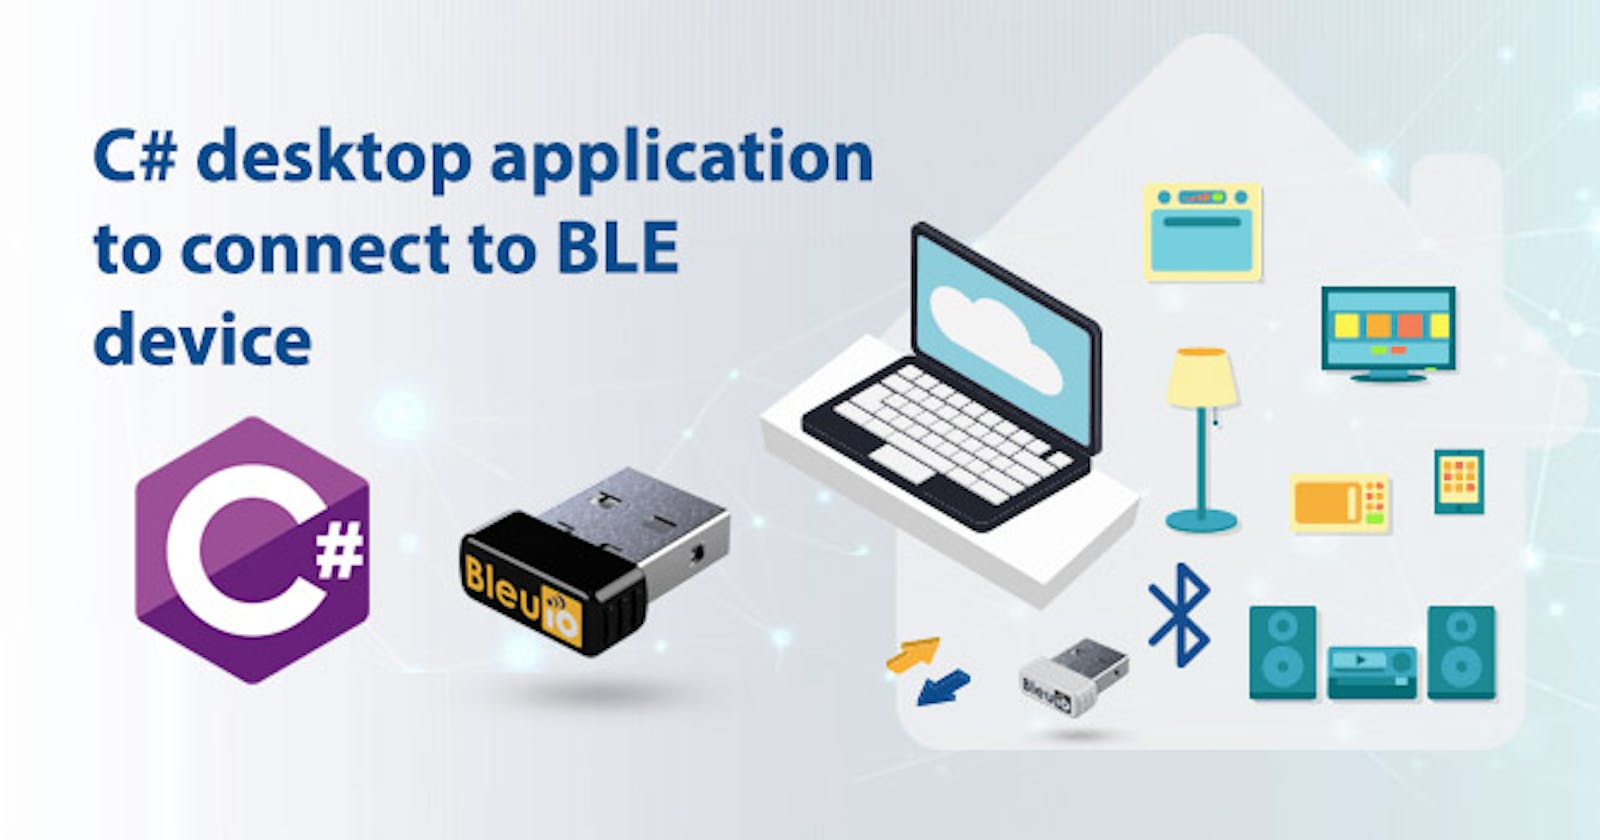 C# desktop application to connect to BLE devices using BleuIO